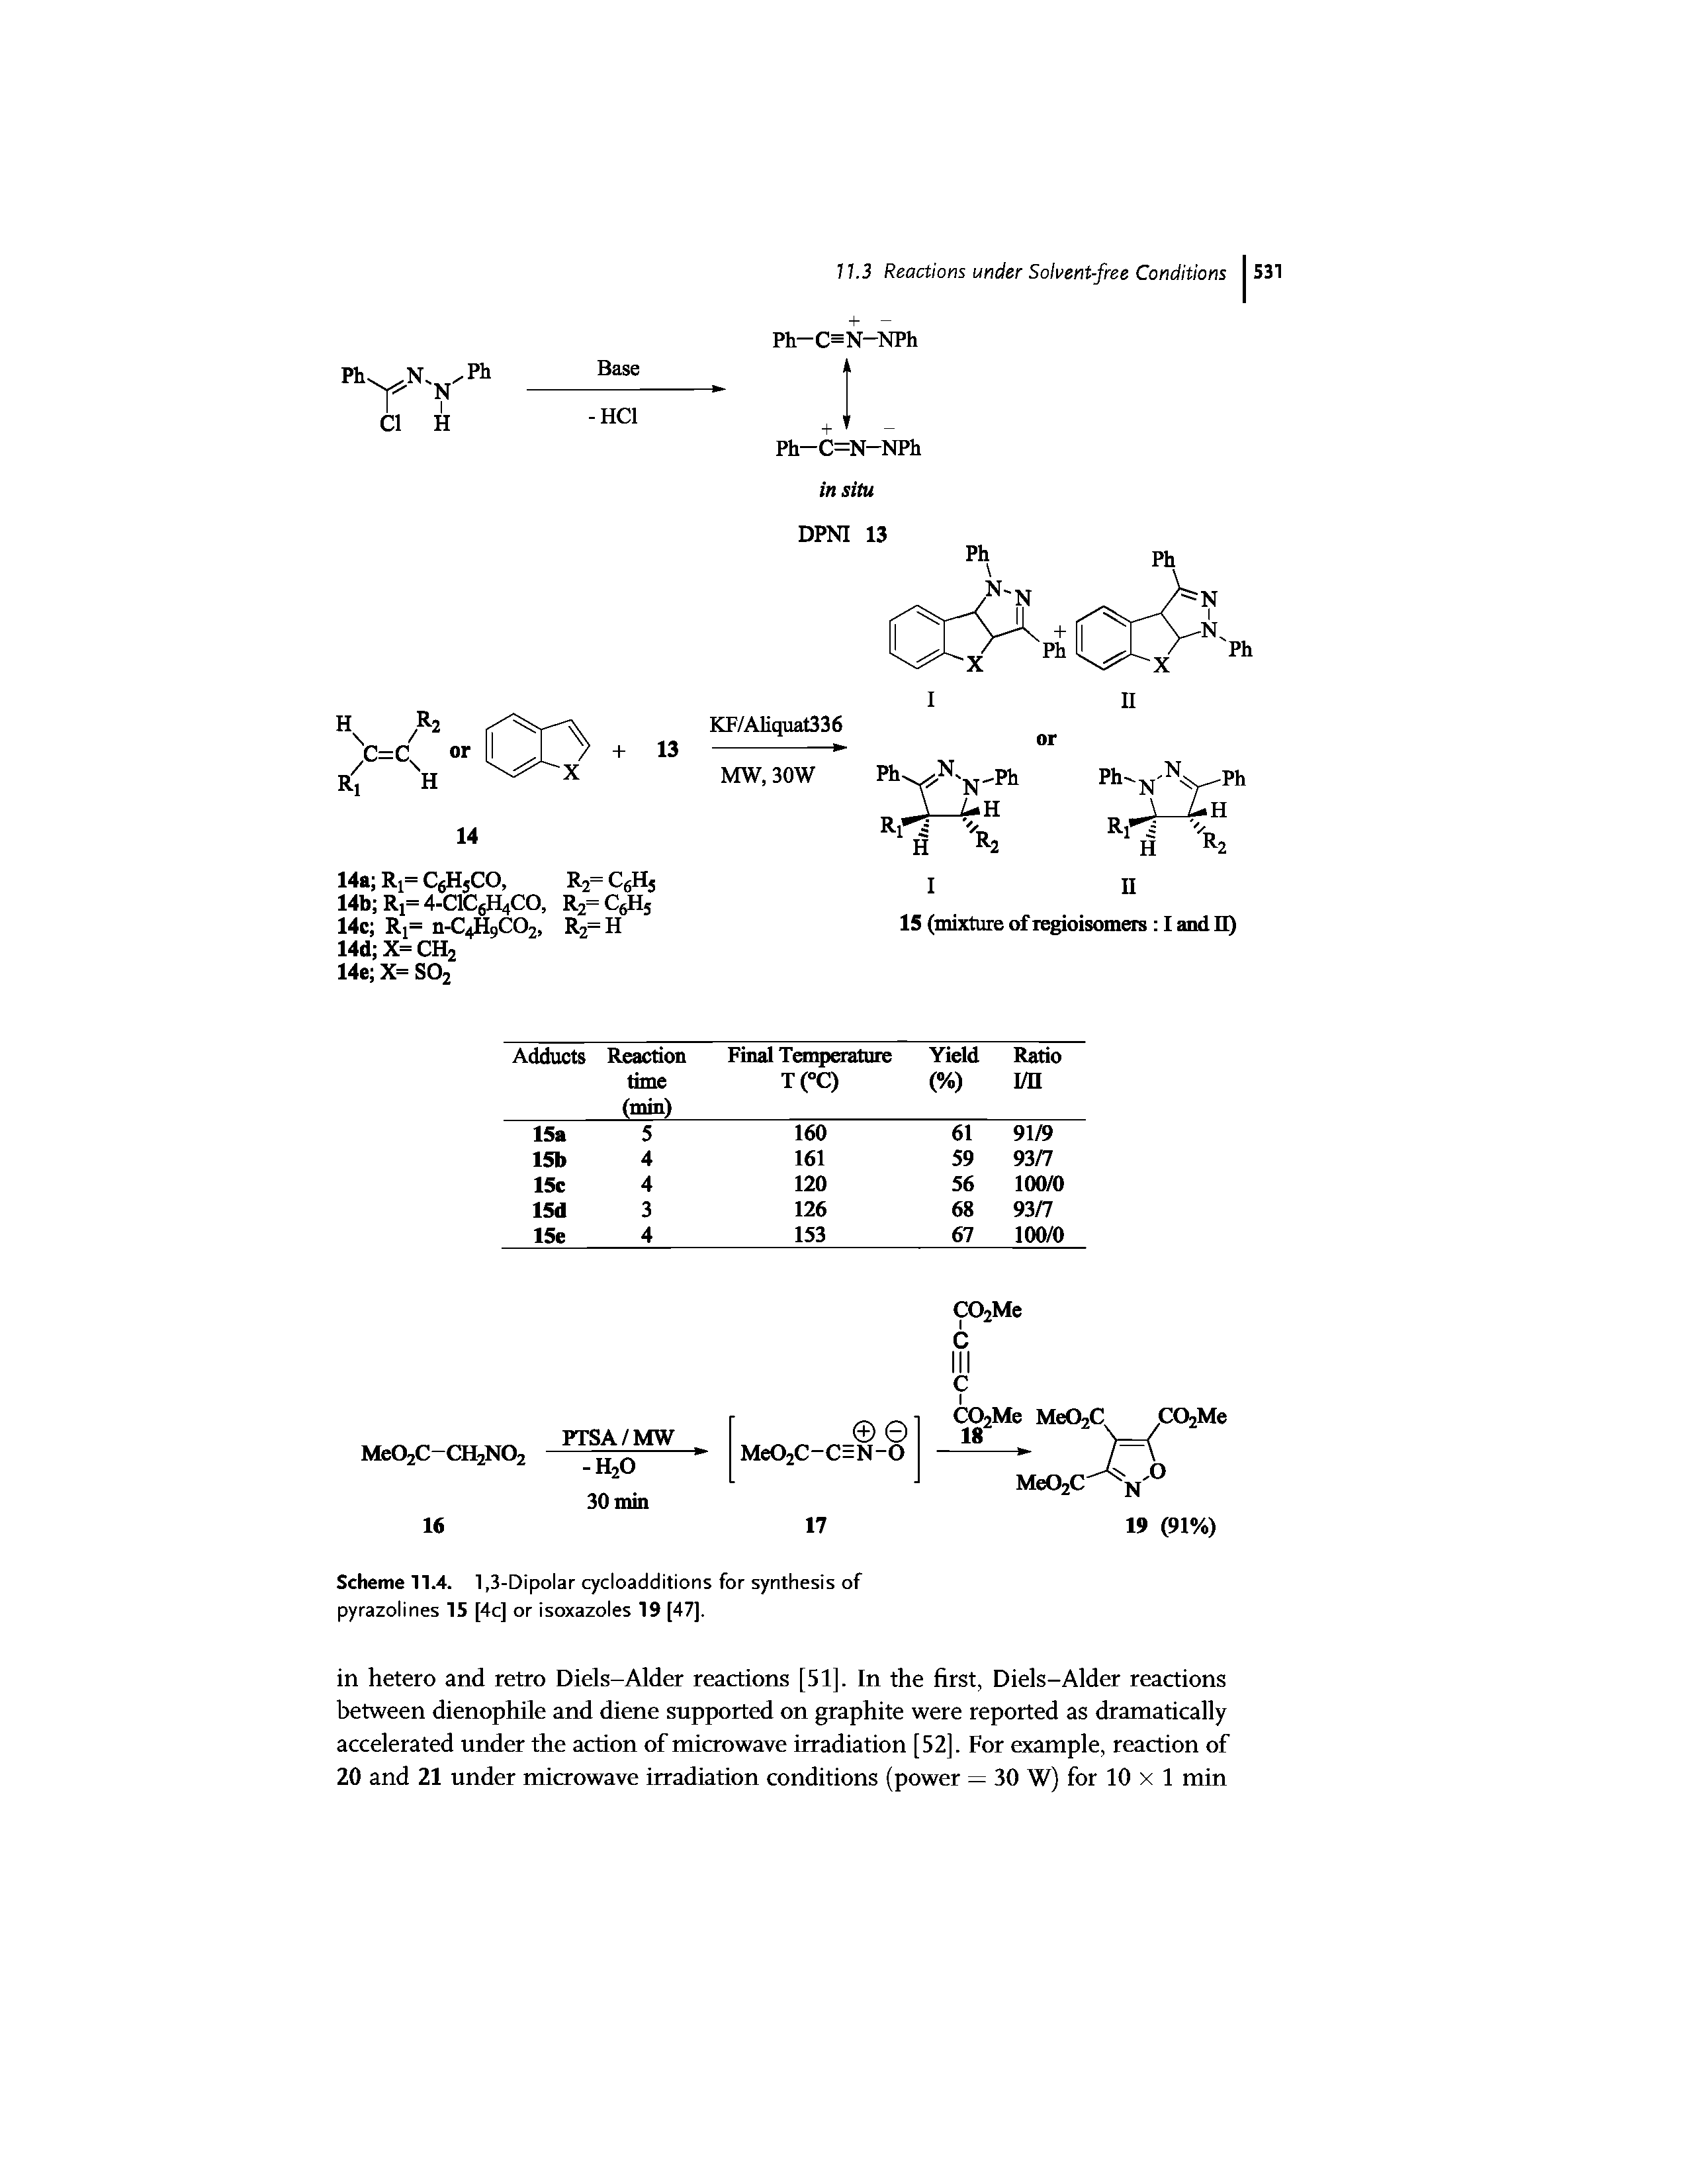 Scheme 11.4. 1,3-Dipolar cycloadditions for synthesis of pyrazolines 15 [4c] or isoxazoles 19 [47].